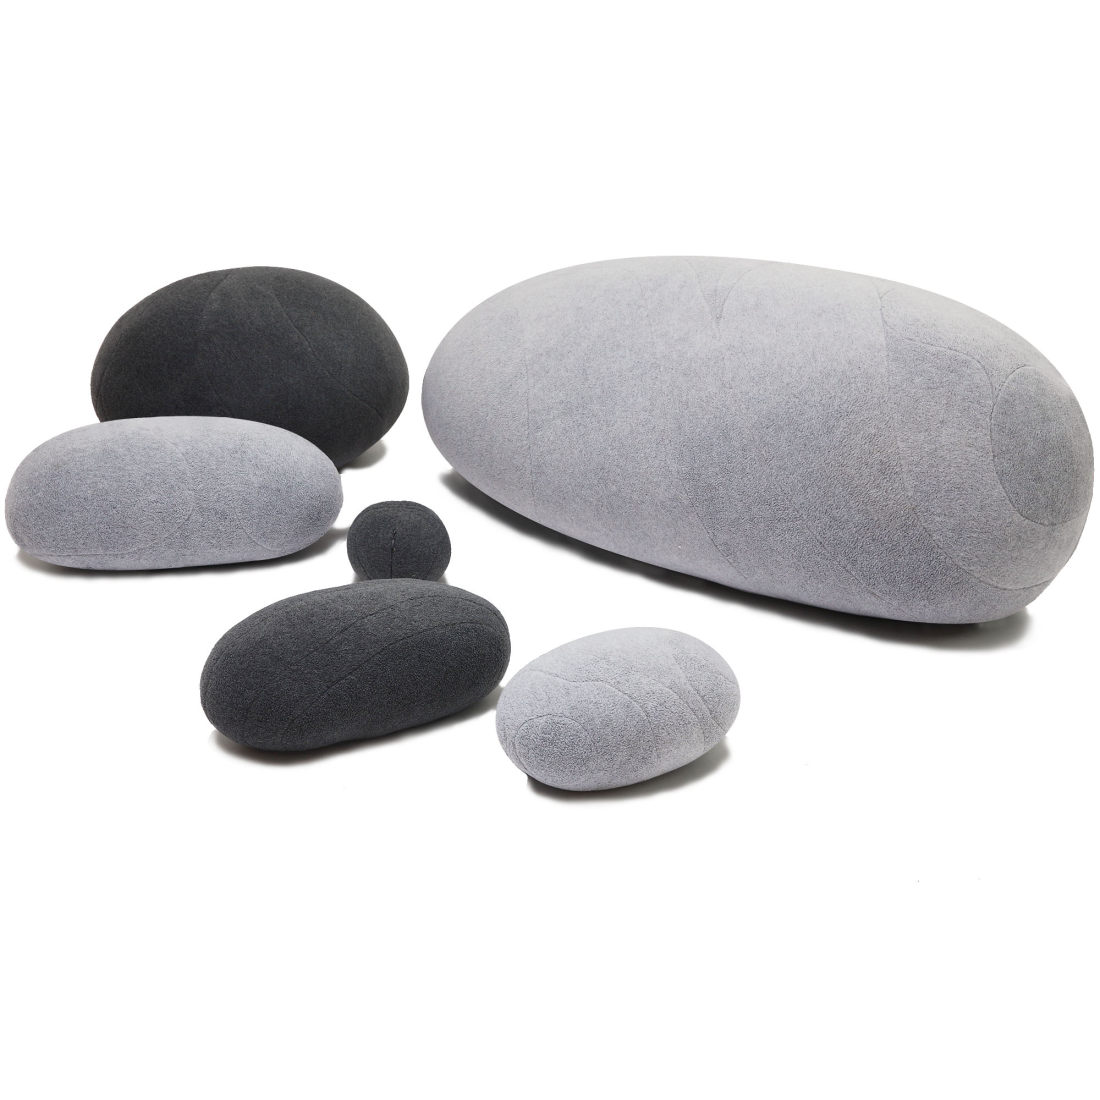 Decorative Pillows Huge Pebble Cushions Rock Cushions Rock Pillows Pebble  Pillows Livingstones Throw Pillows For Pillow Fights 